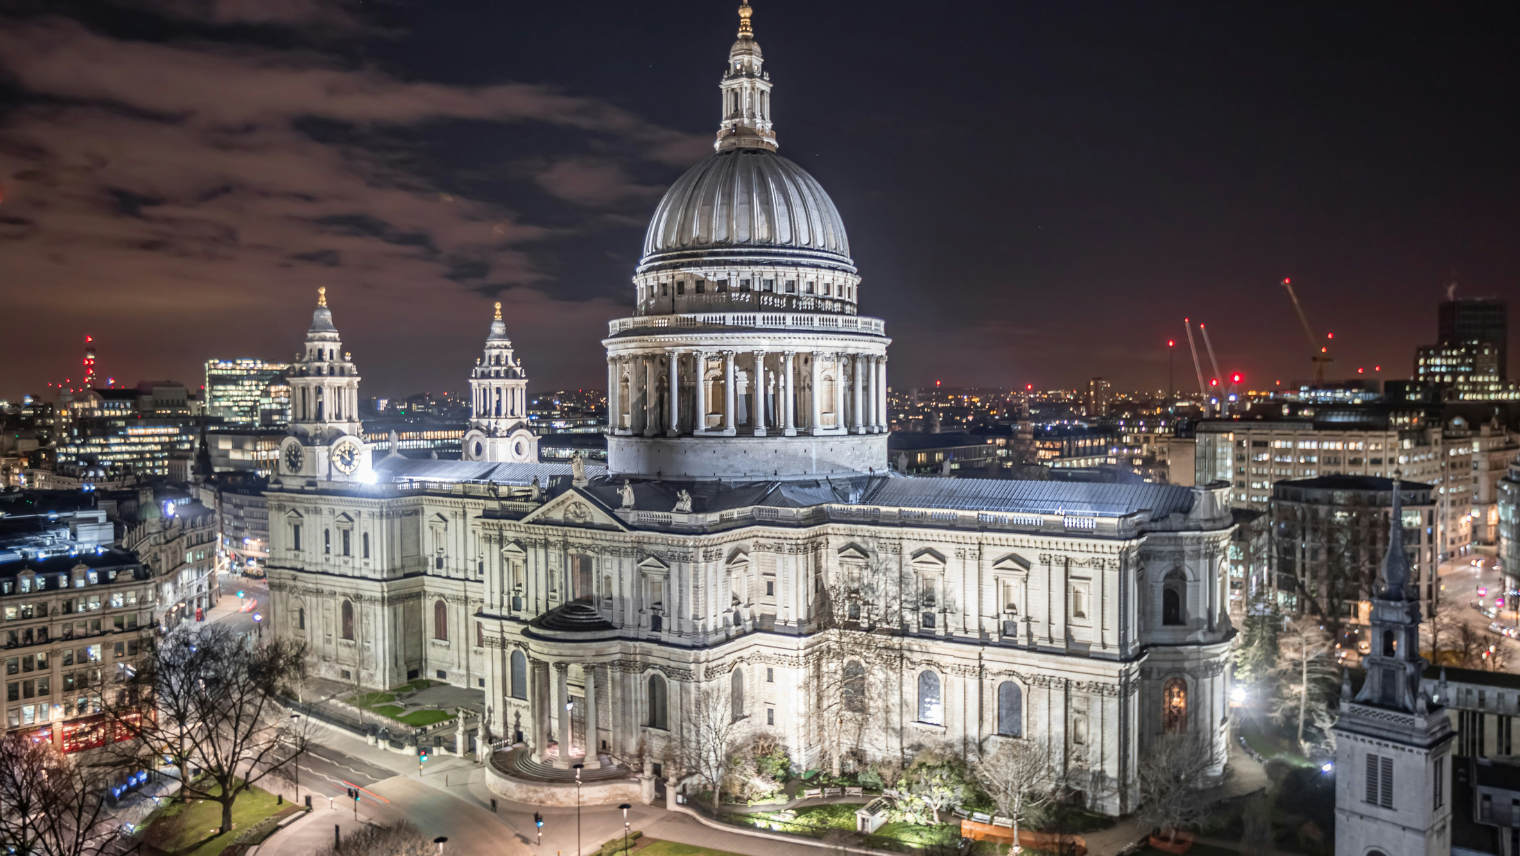 St Paul's Cathedral at night I South Western Railway